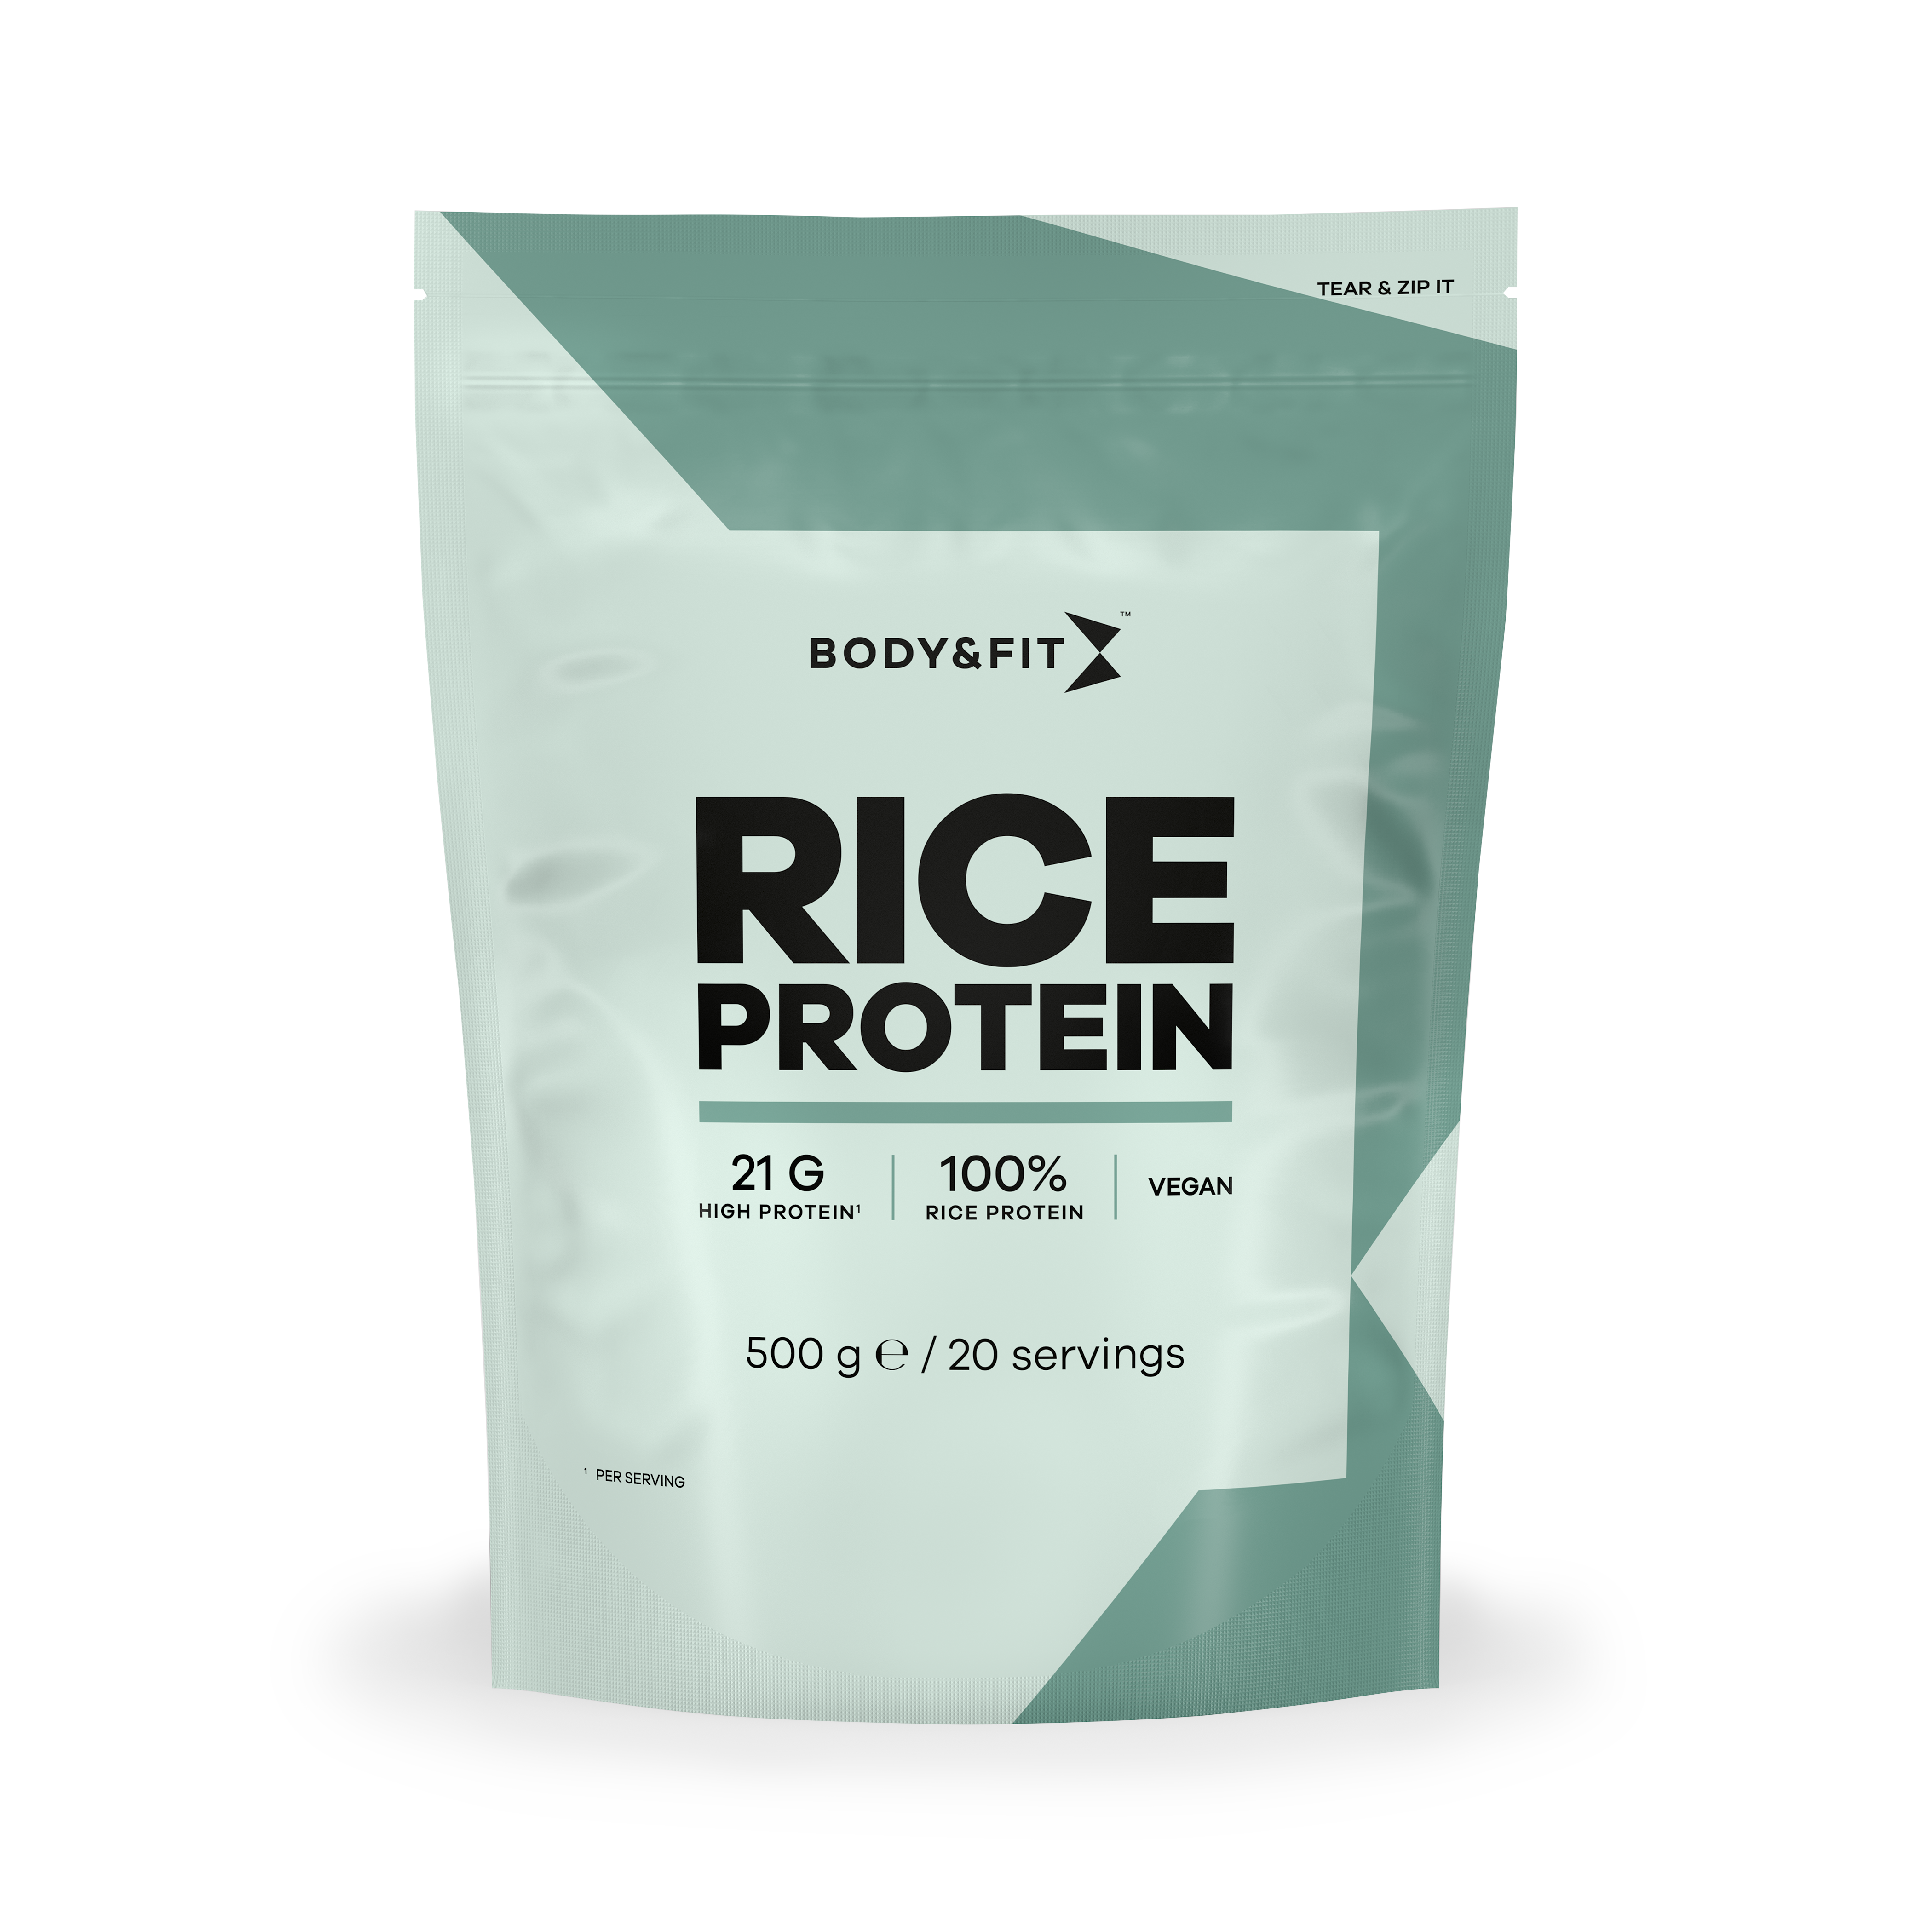 &fit PROTEIN アンドフィットプロテイン 2個セット | clinicaversalles